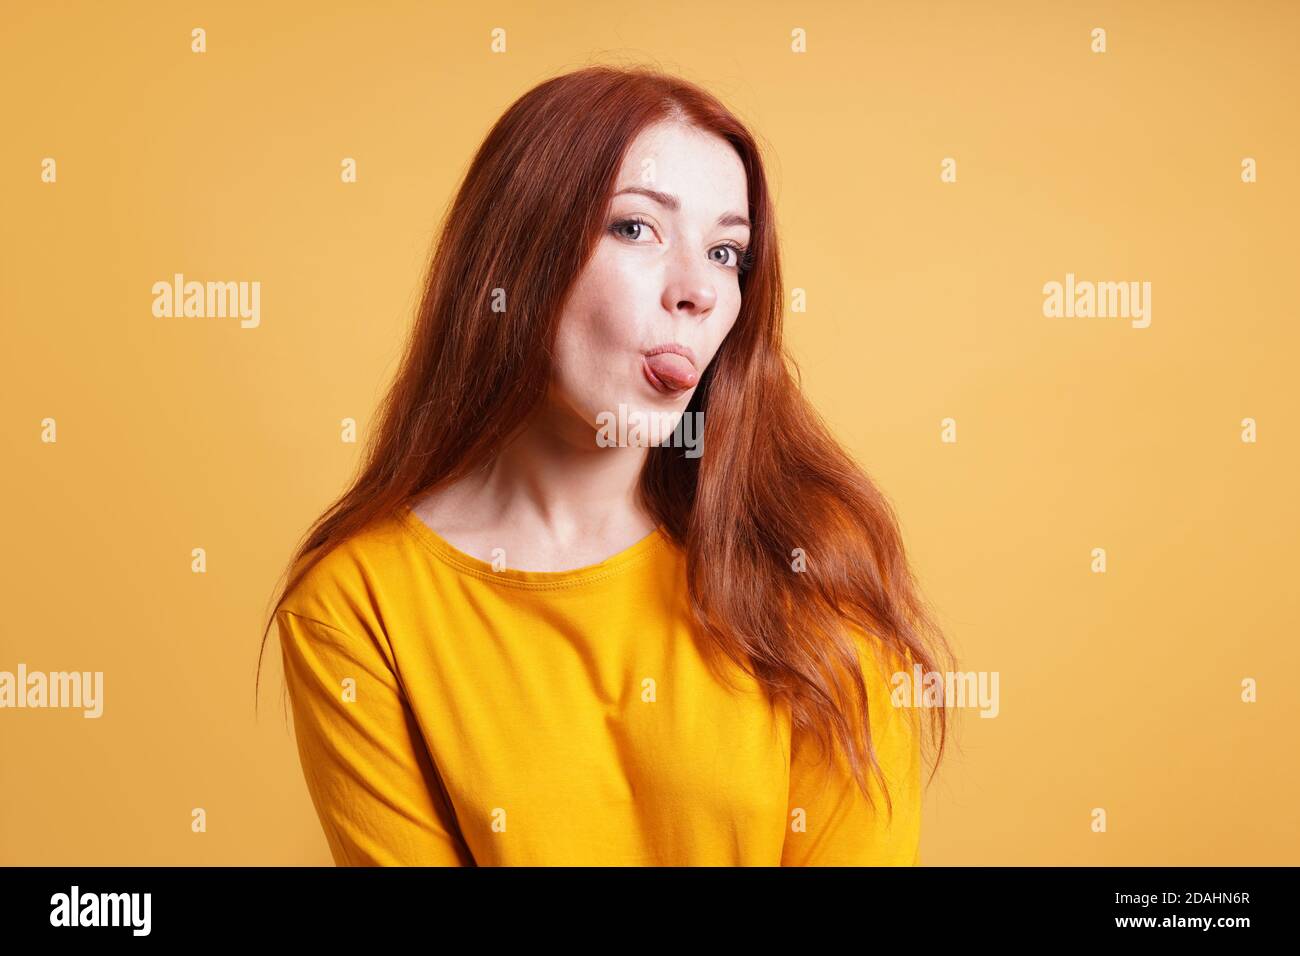 cheeky sassy silly young woman sticking out tongue Stock Photo